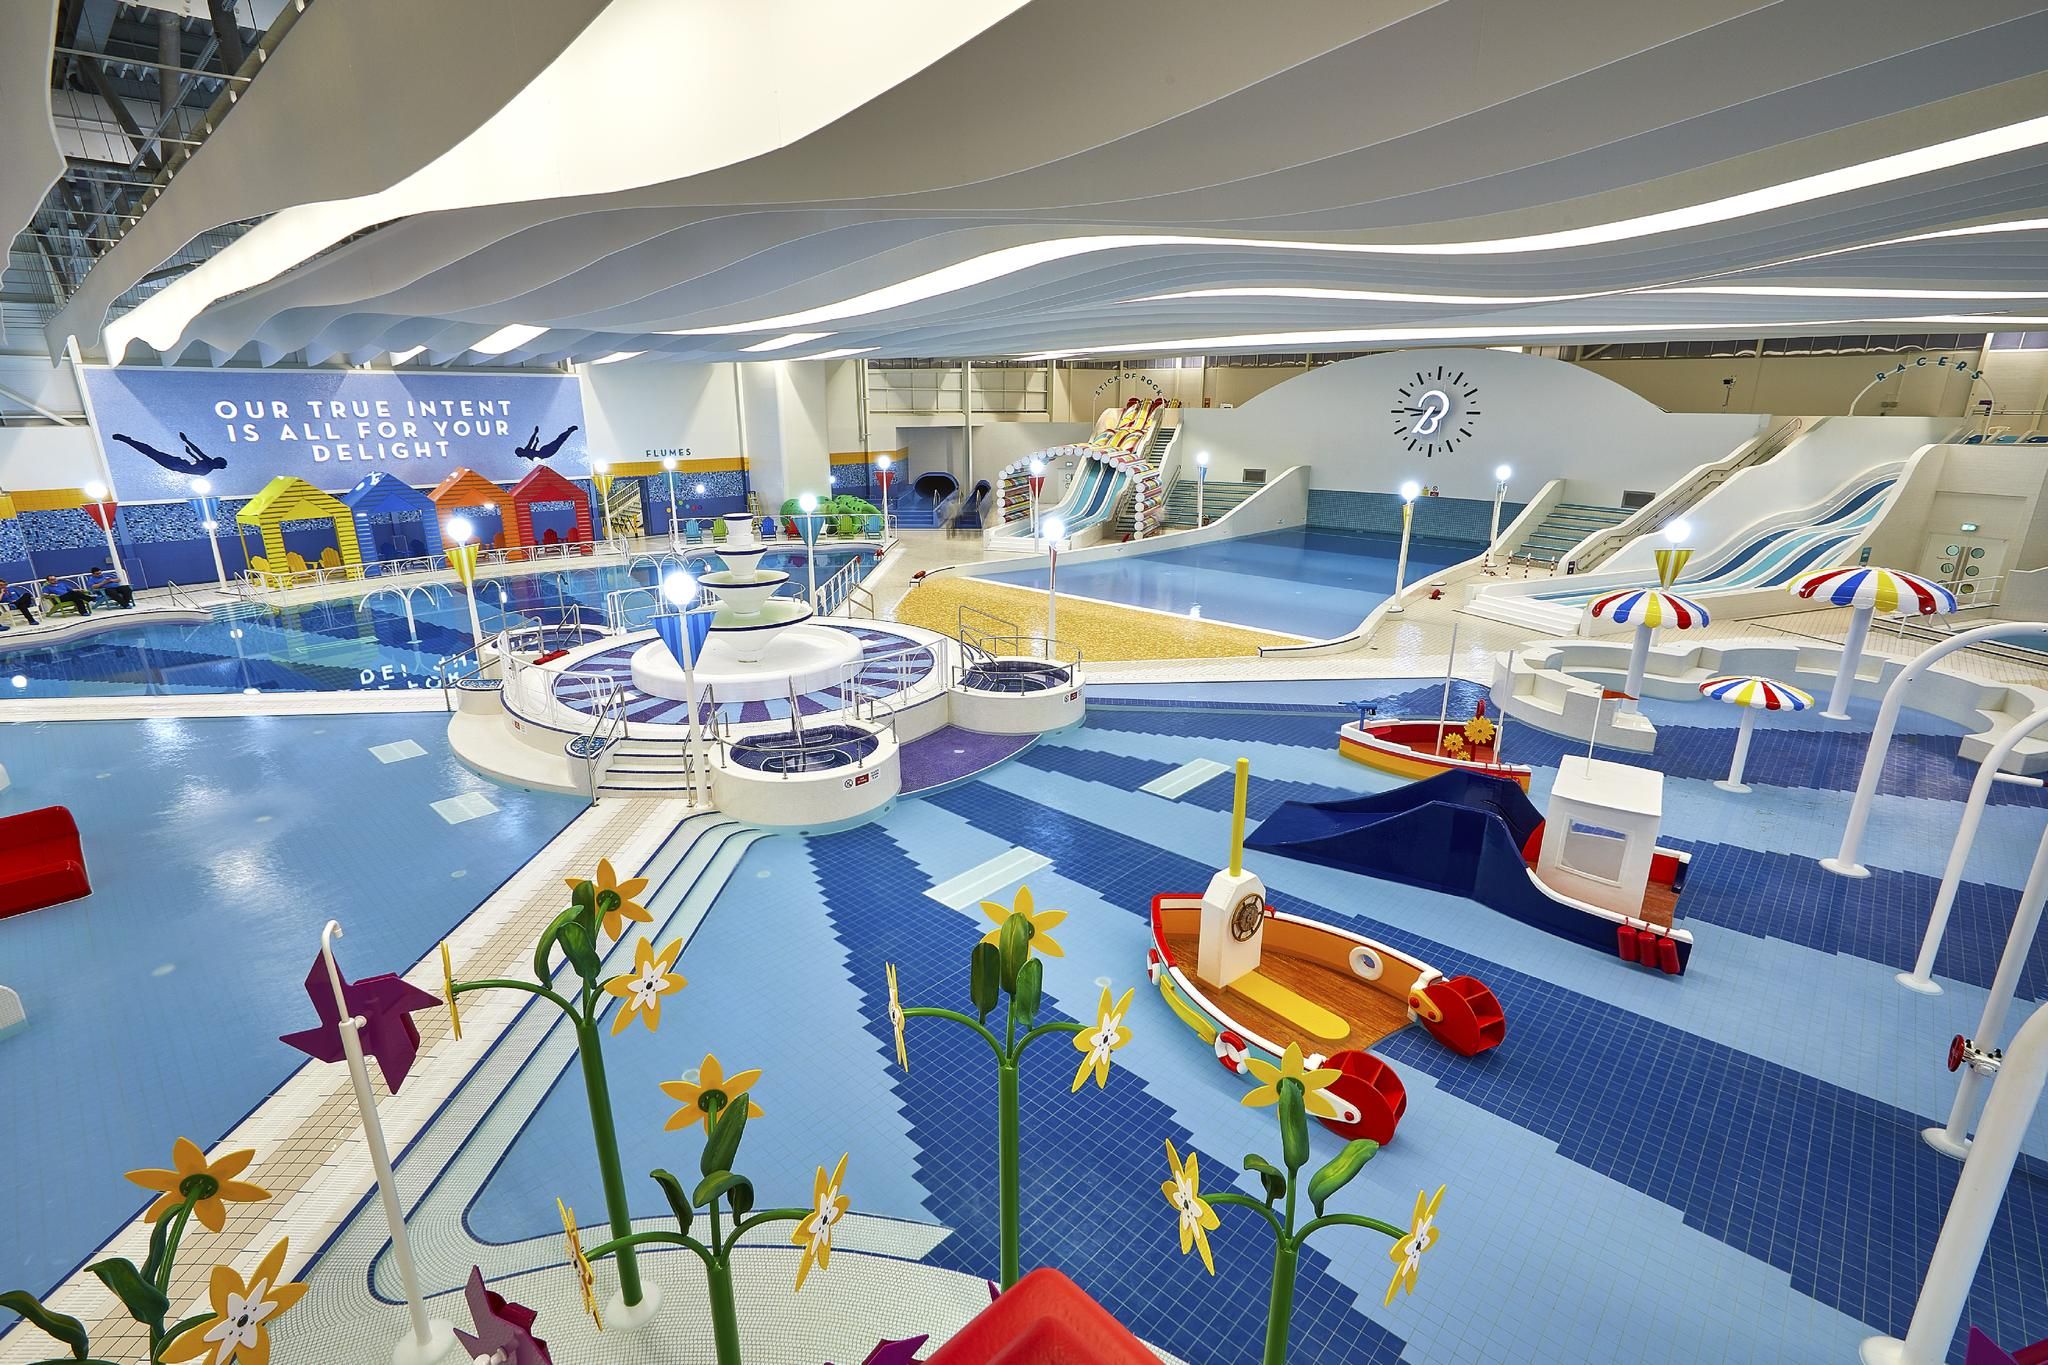 ARDEX Tried & Tested Systems in £40million Rebuild of Butlins’ Bognor Regis Pool Complex